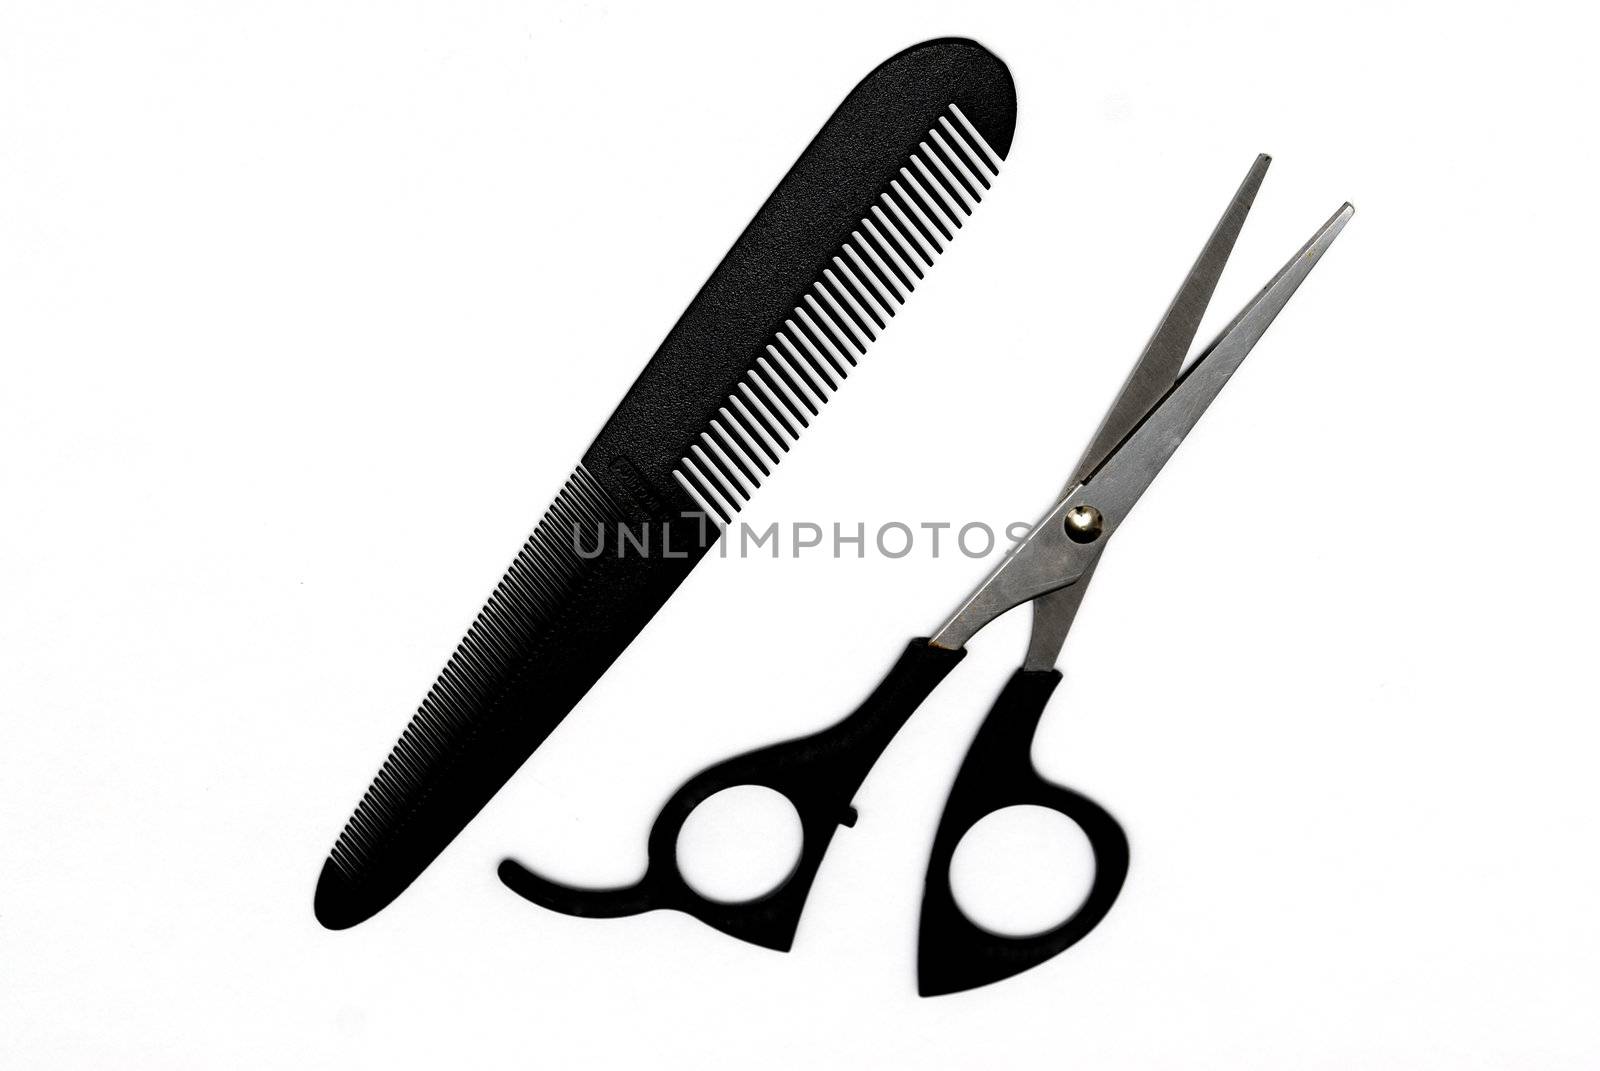 Scissors and comb concept pf an hair cut